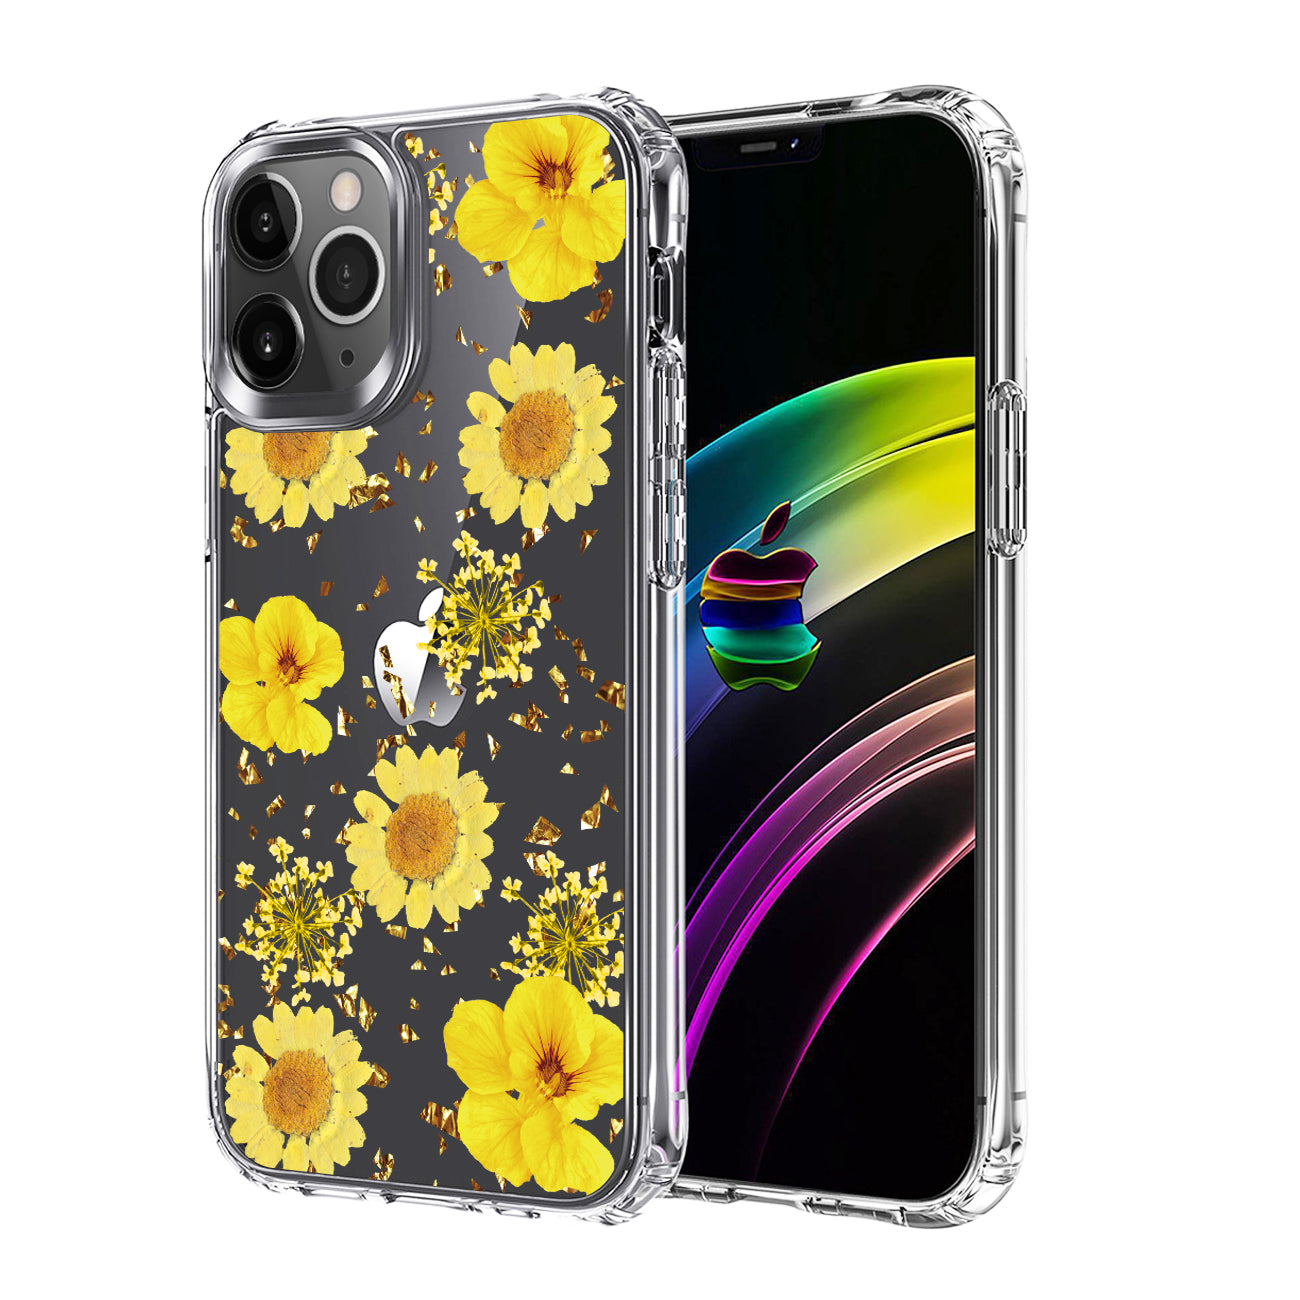 Pressed dried flower Design Phone case for APPLE IPHONE 11 PRO MAX in Yellow